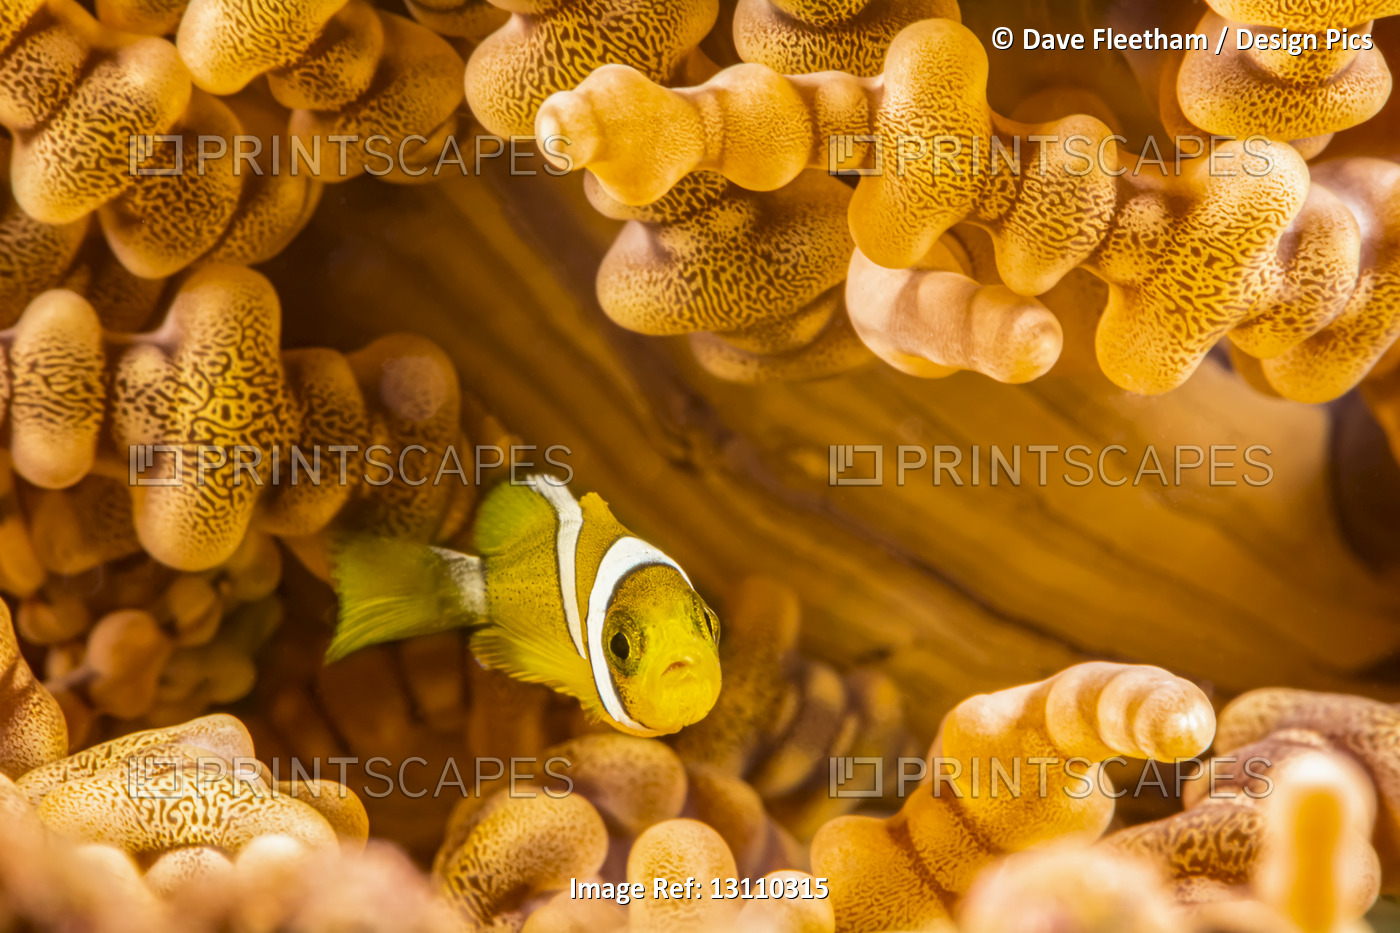 This juvenile Orange-fin anemonefish (Amphiprion chrysopterus) is pictured ...